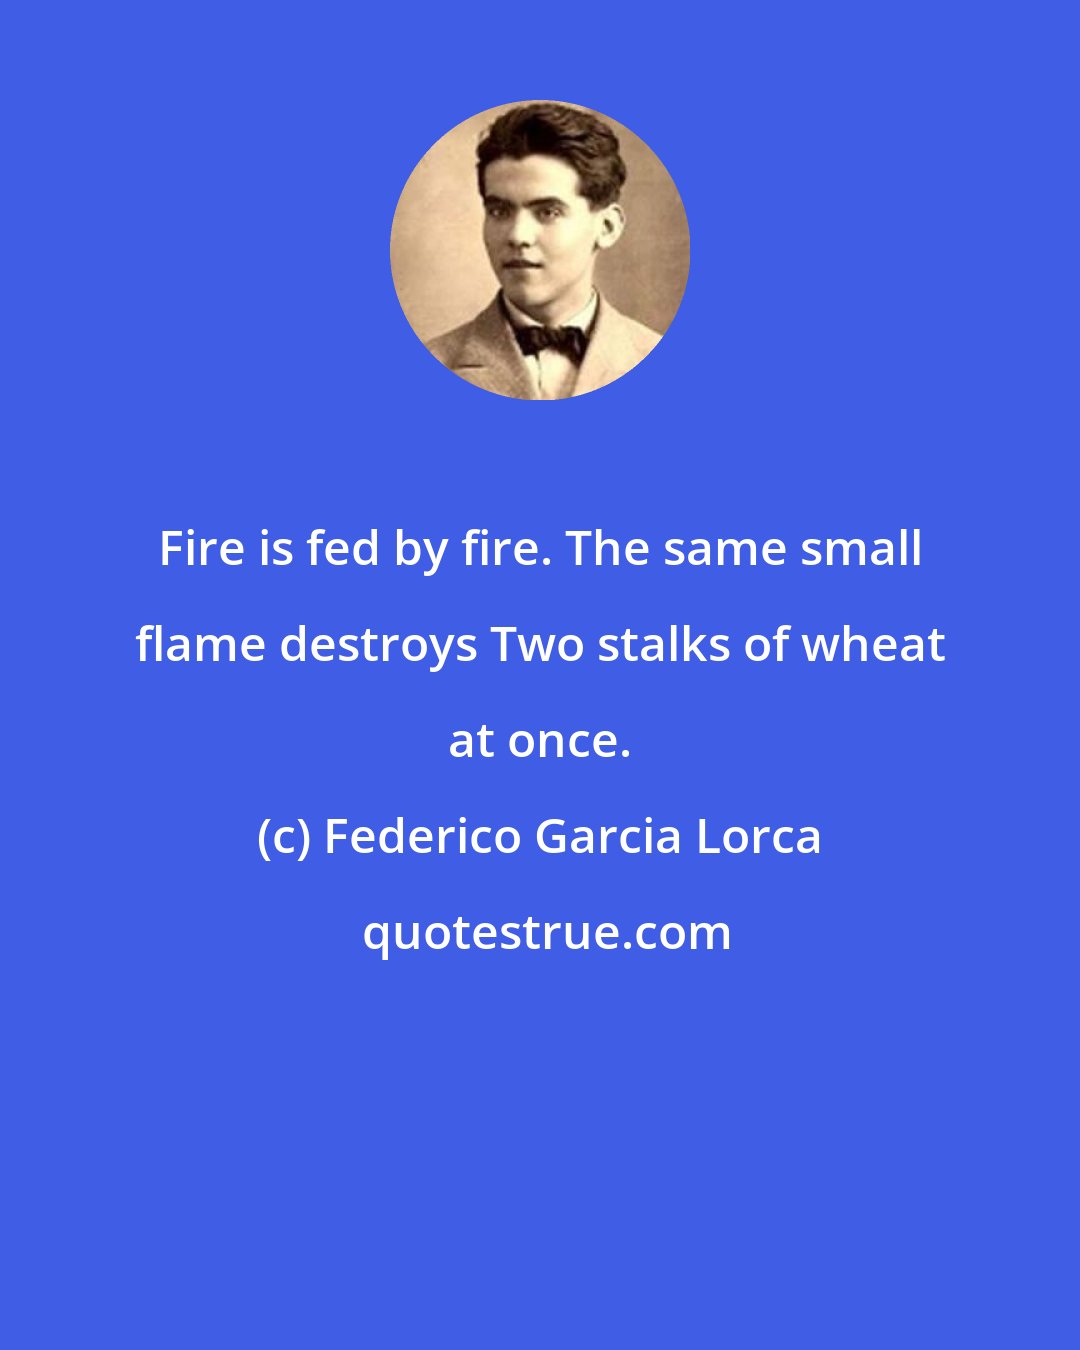 Federico Garcia Lorca: Fire is fed by fire. The same small flame destroys Two stalks of wheat at once.